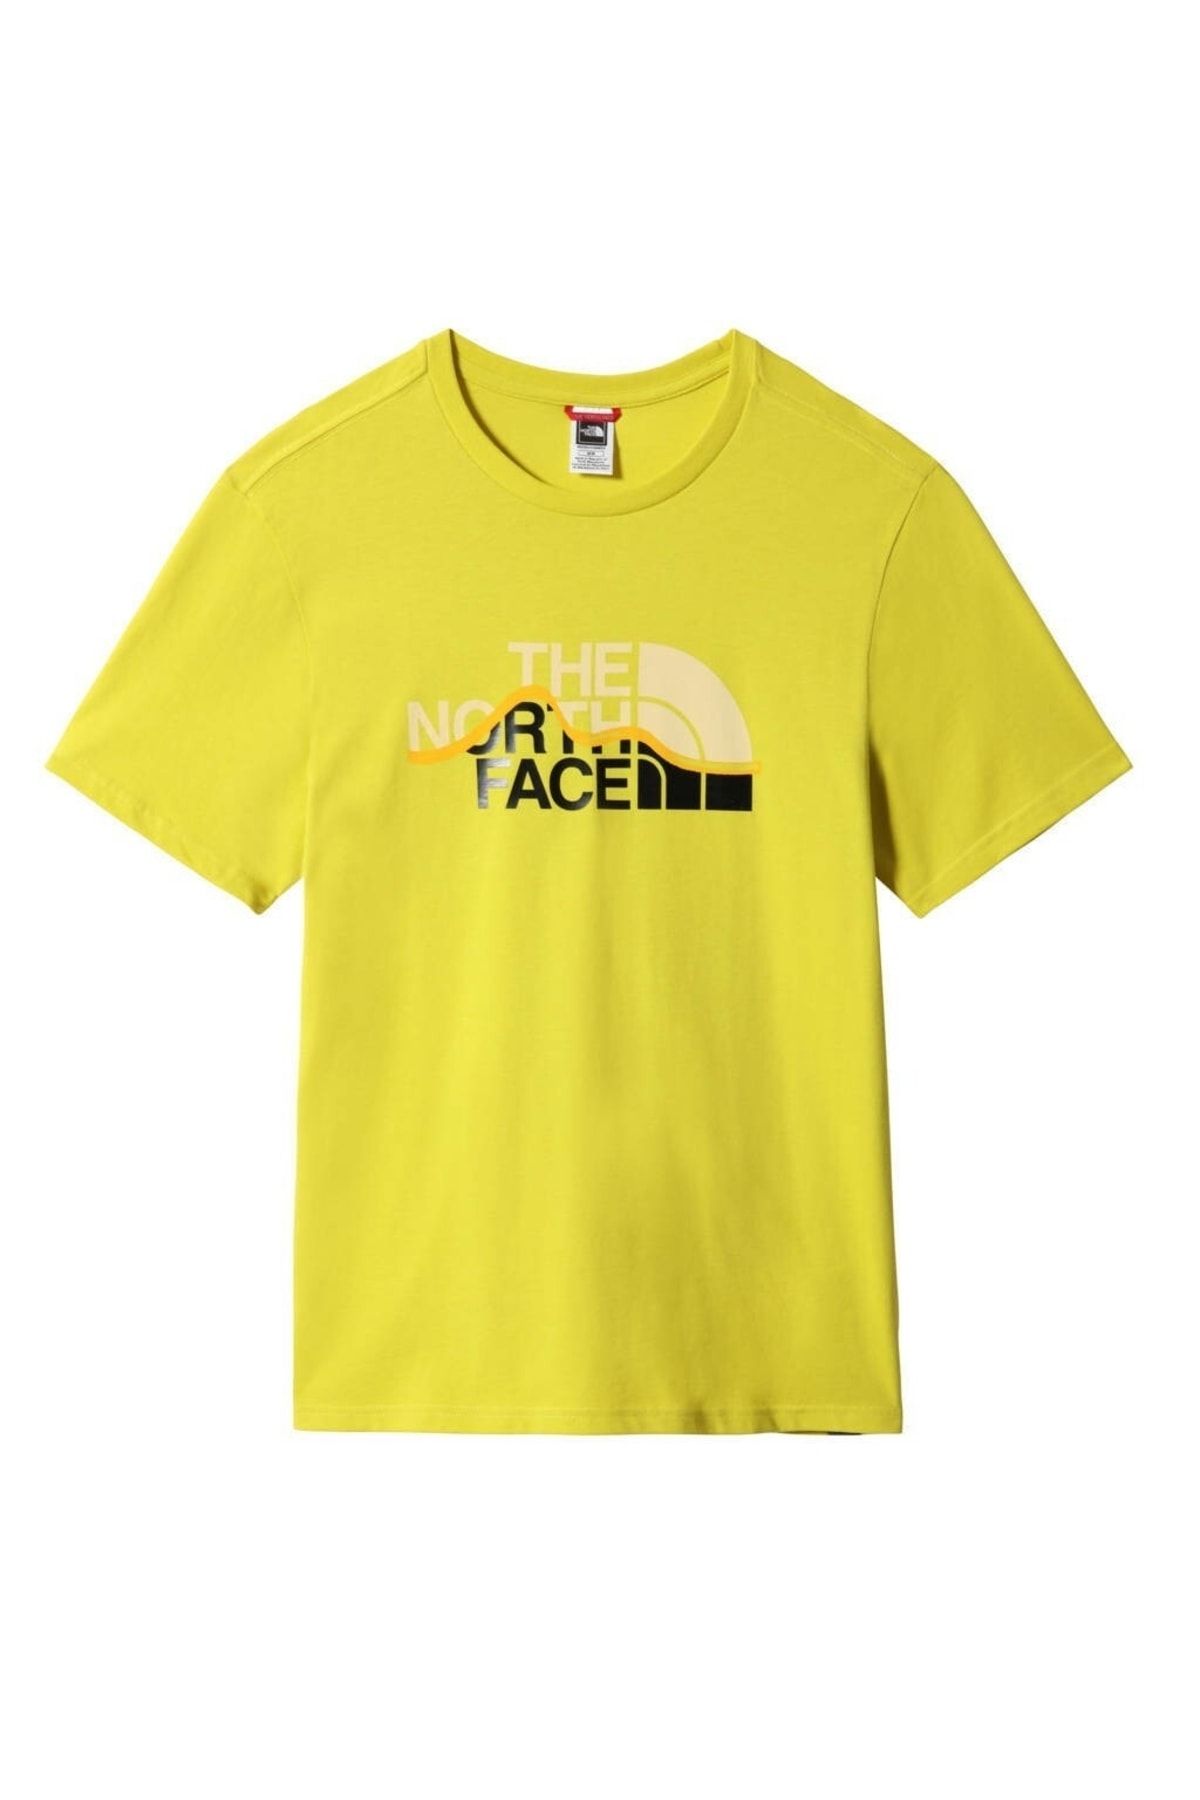 The North Face تی شرت مردانه کوهستانی خط NF00A3G27601